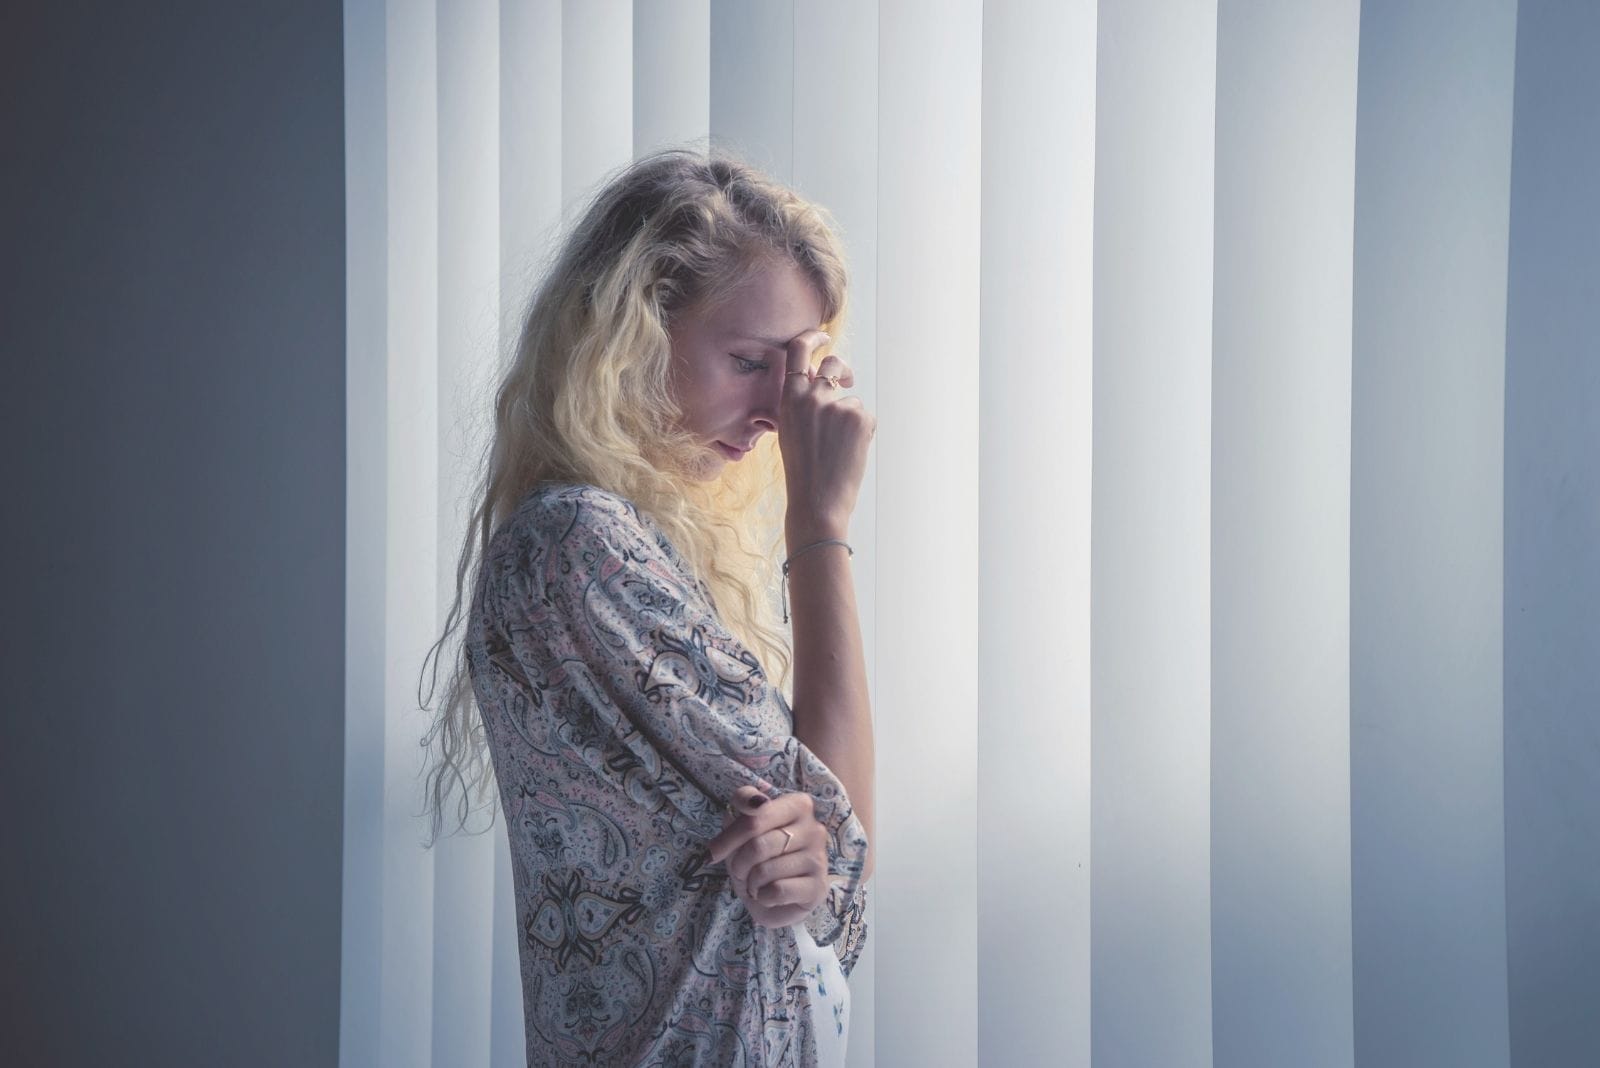 pensive blonde caucasian woman placing her hand in her forehead standing near the curtained windows